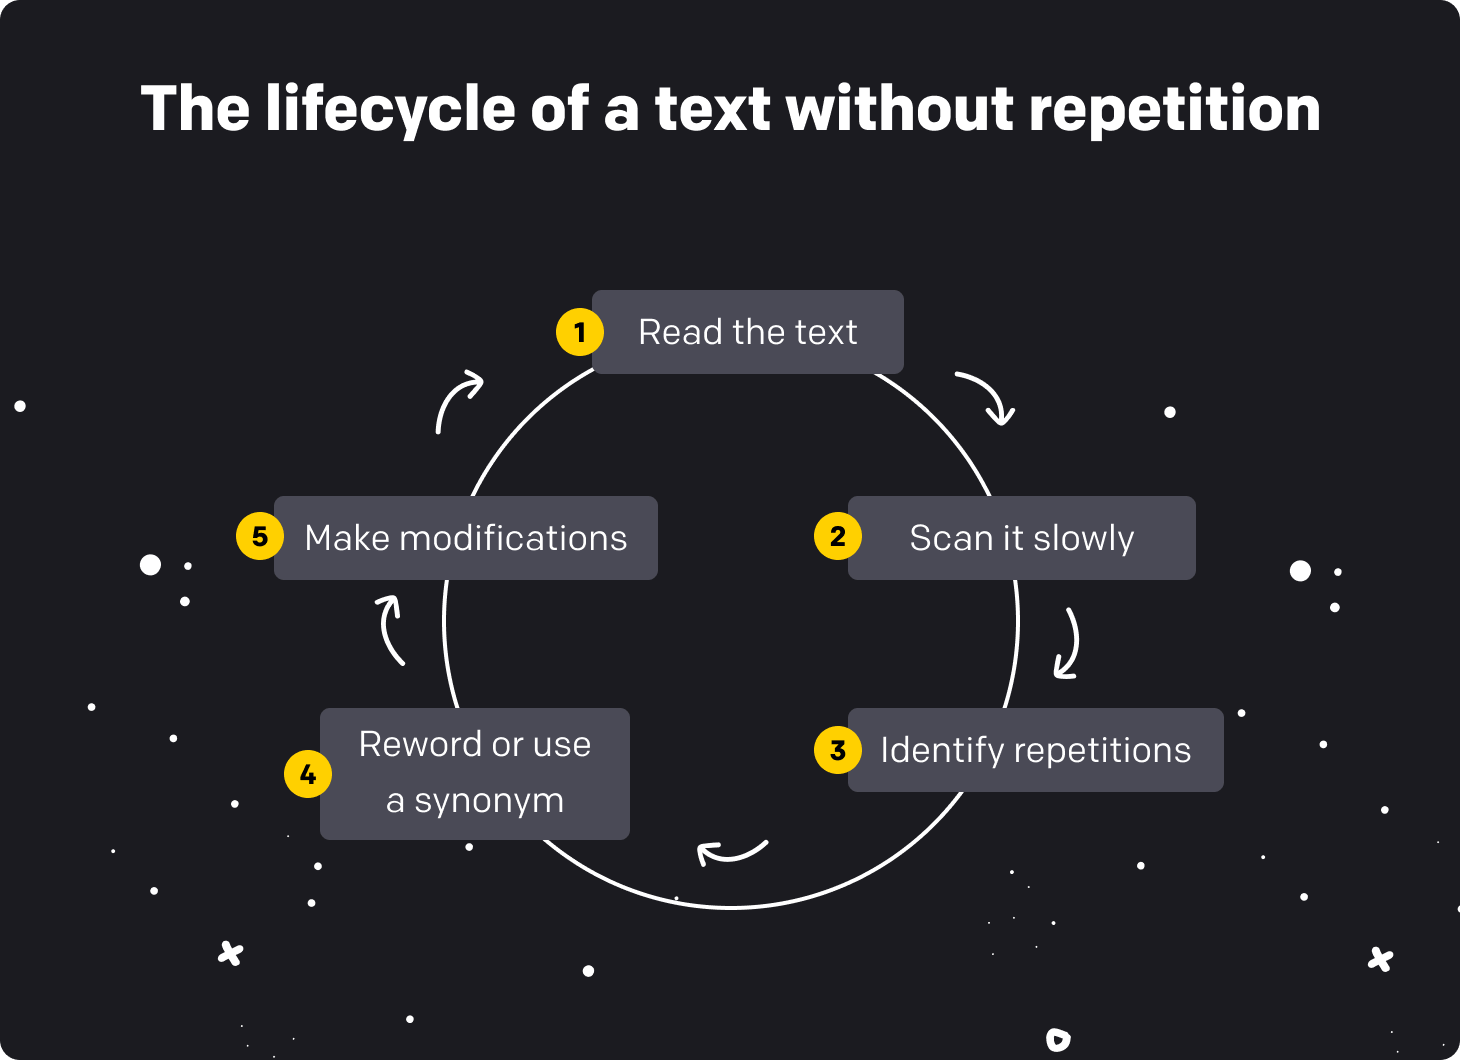 The lifecycle of a text without repetition.